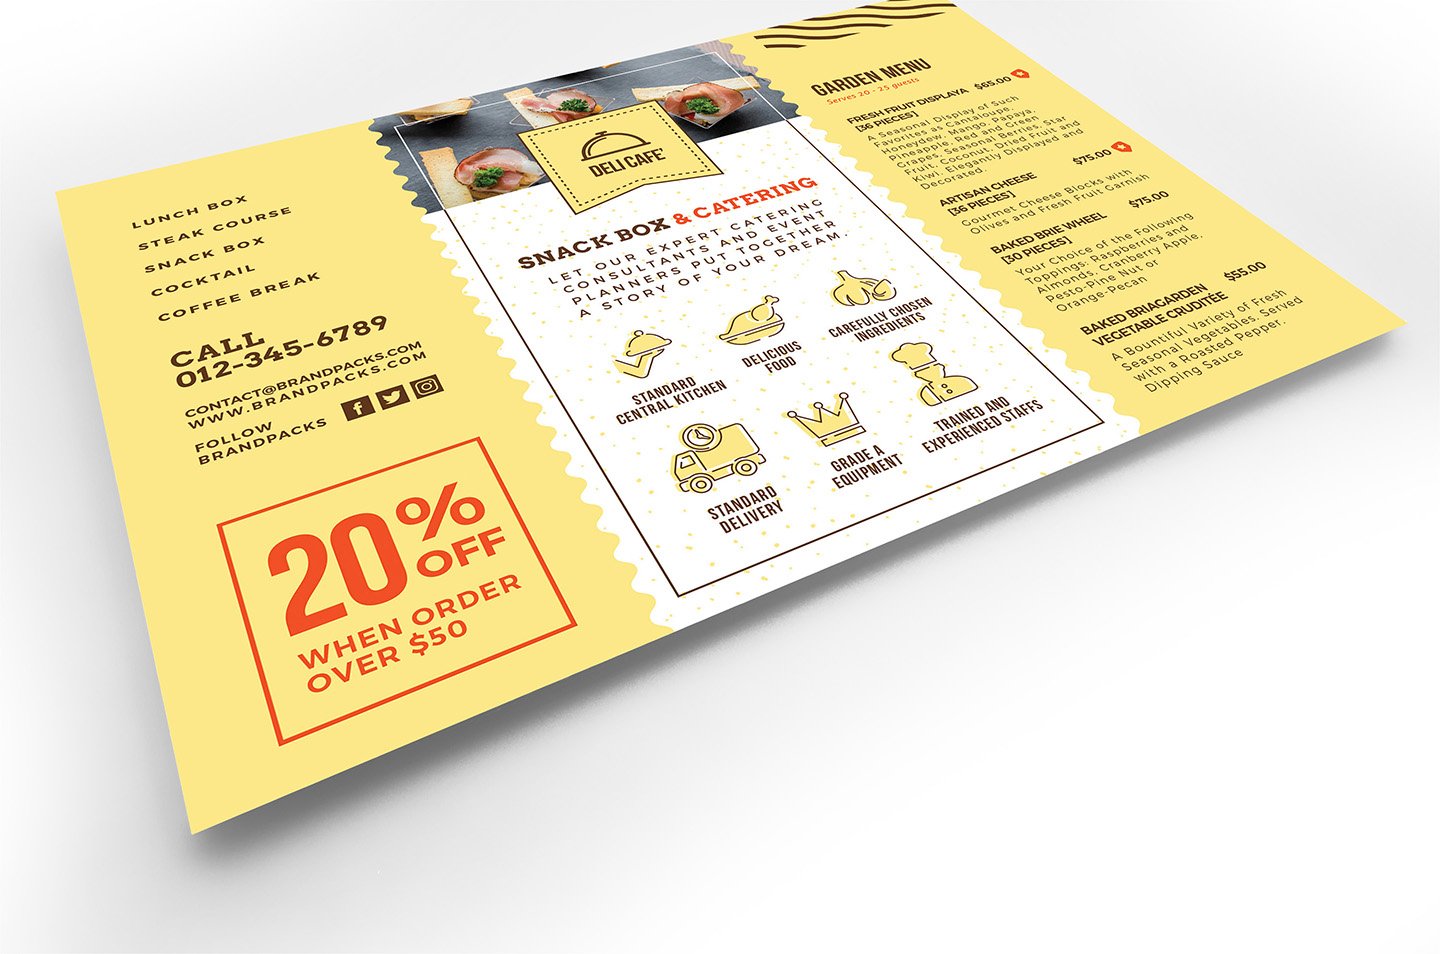 catering service flyer template 2 489